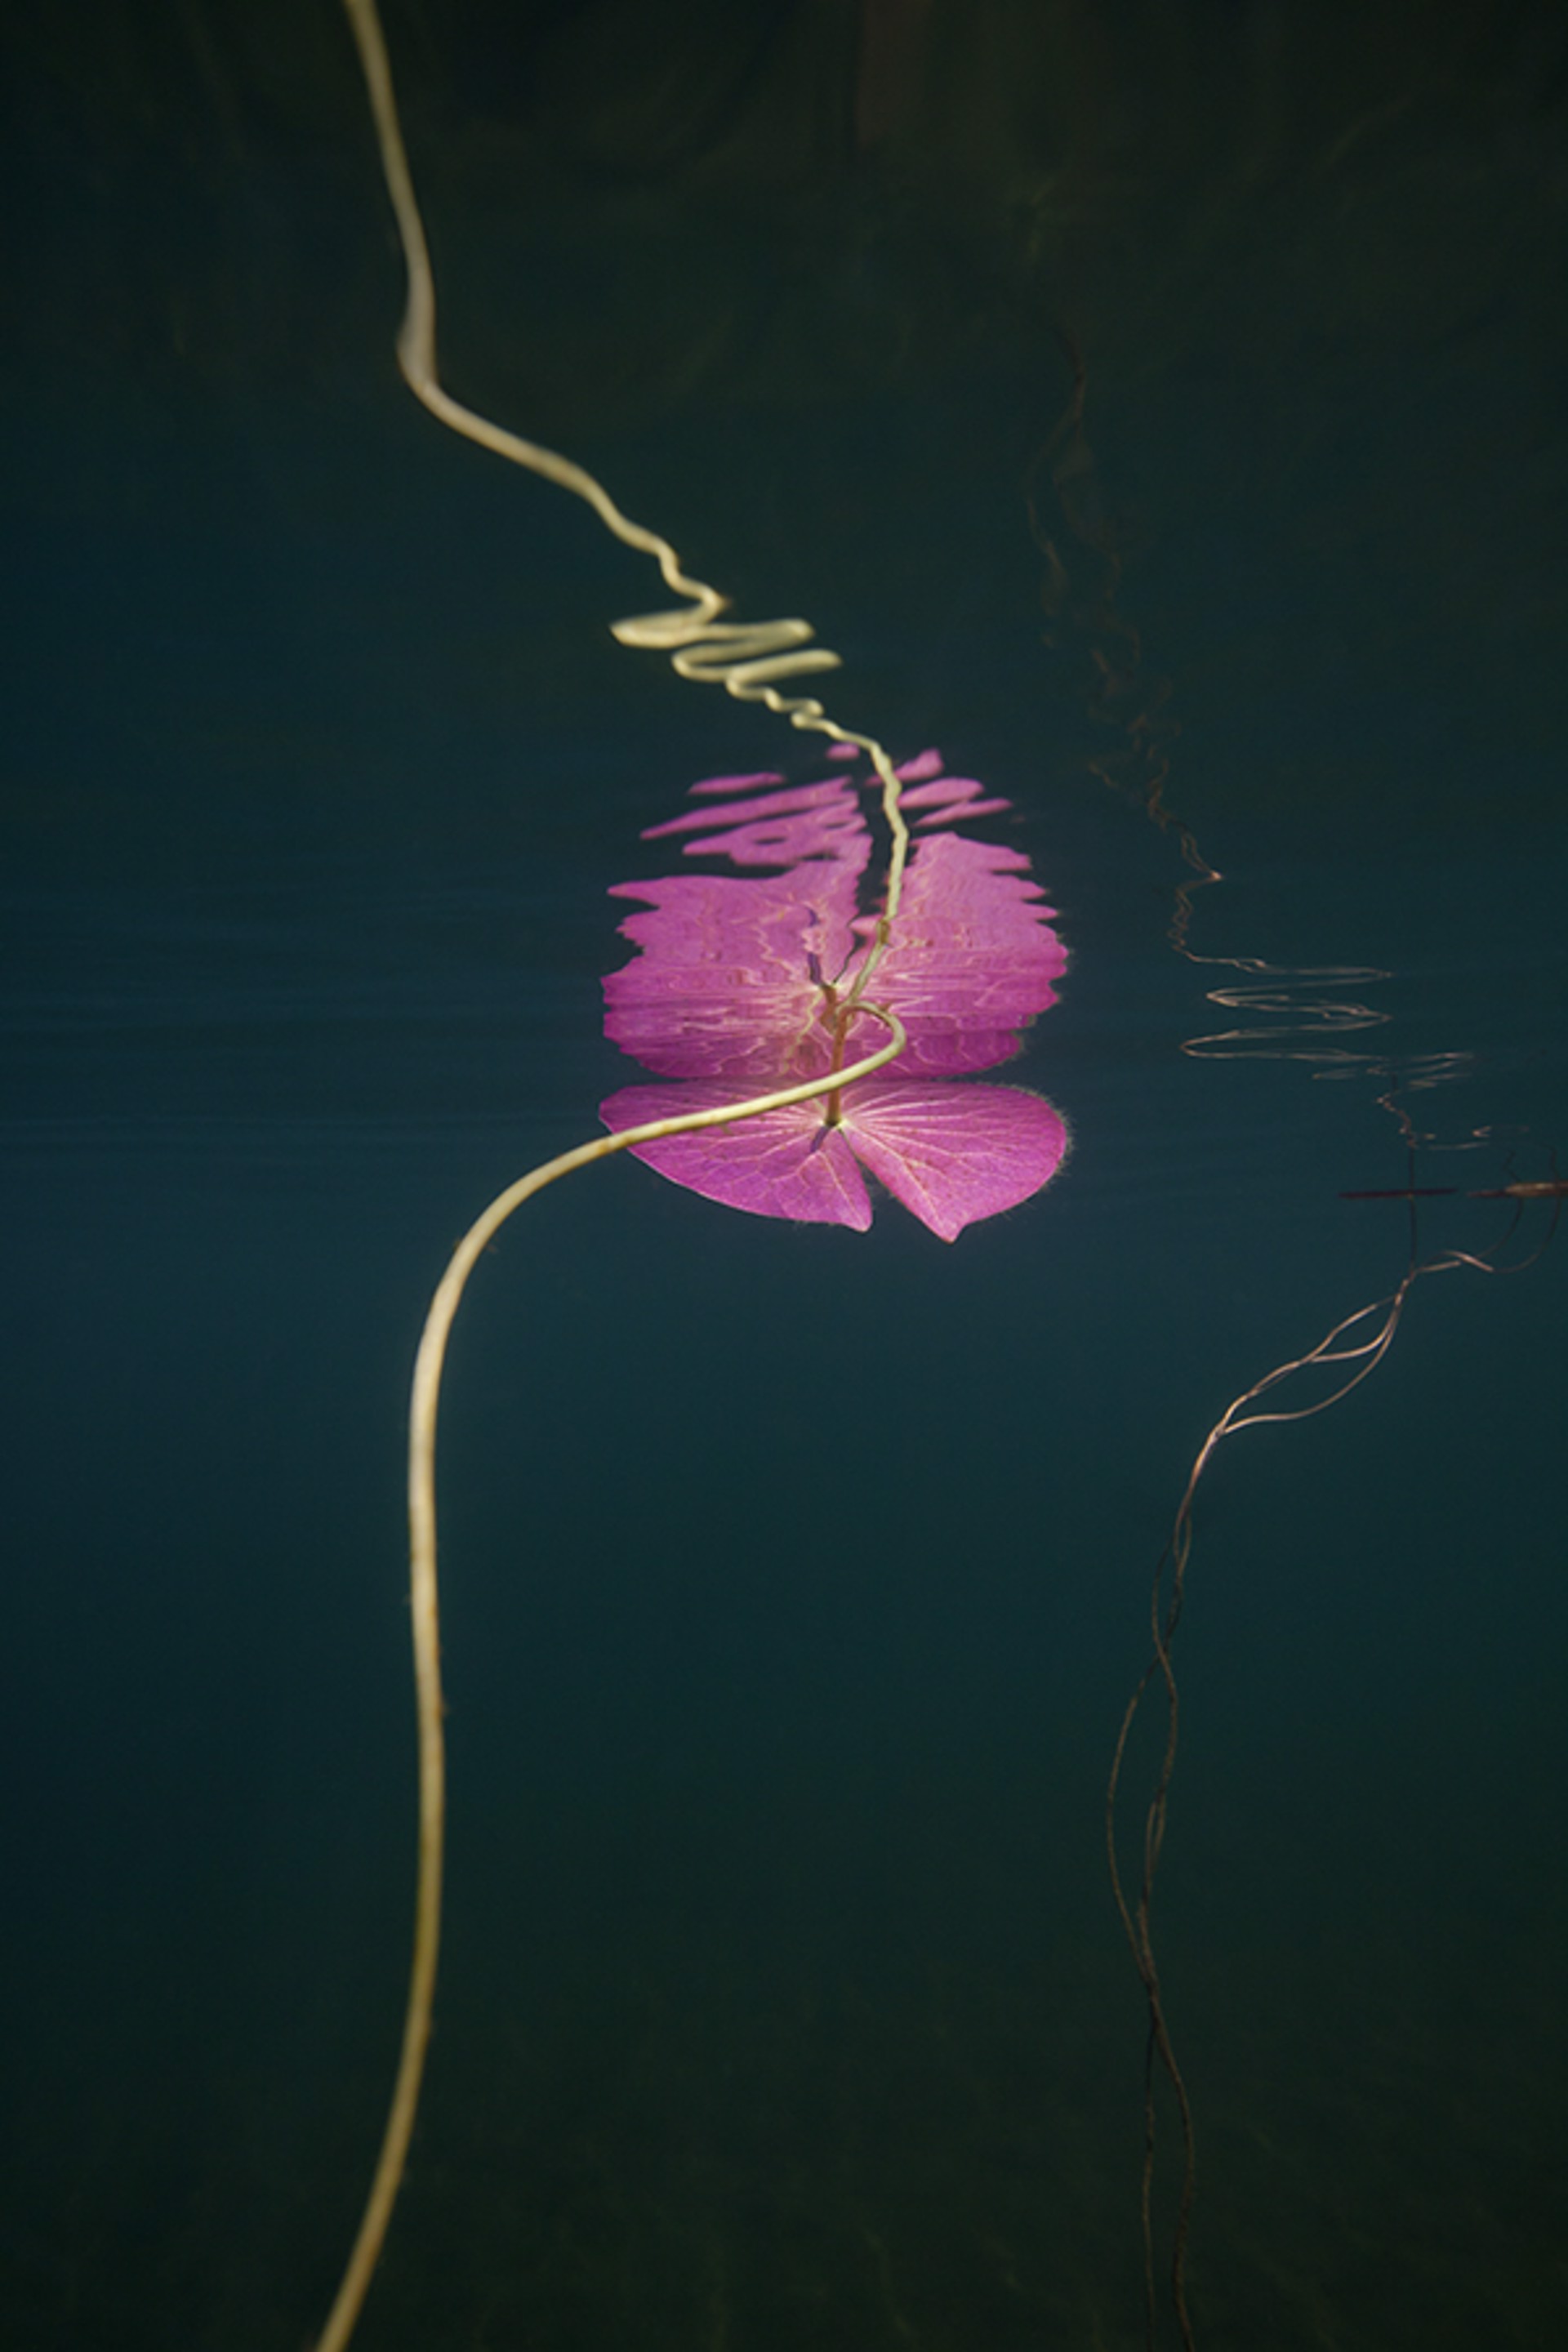 WATER LILY STUDY NO. 17 by WILLIAM SCULLY